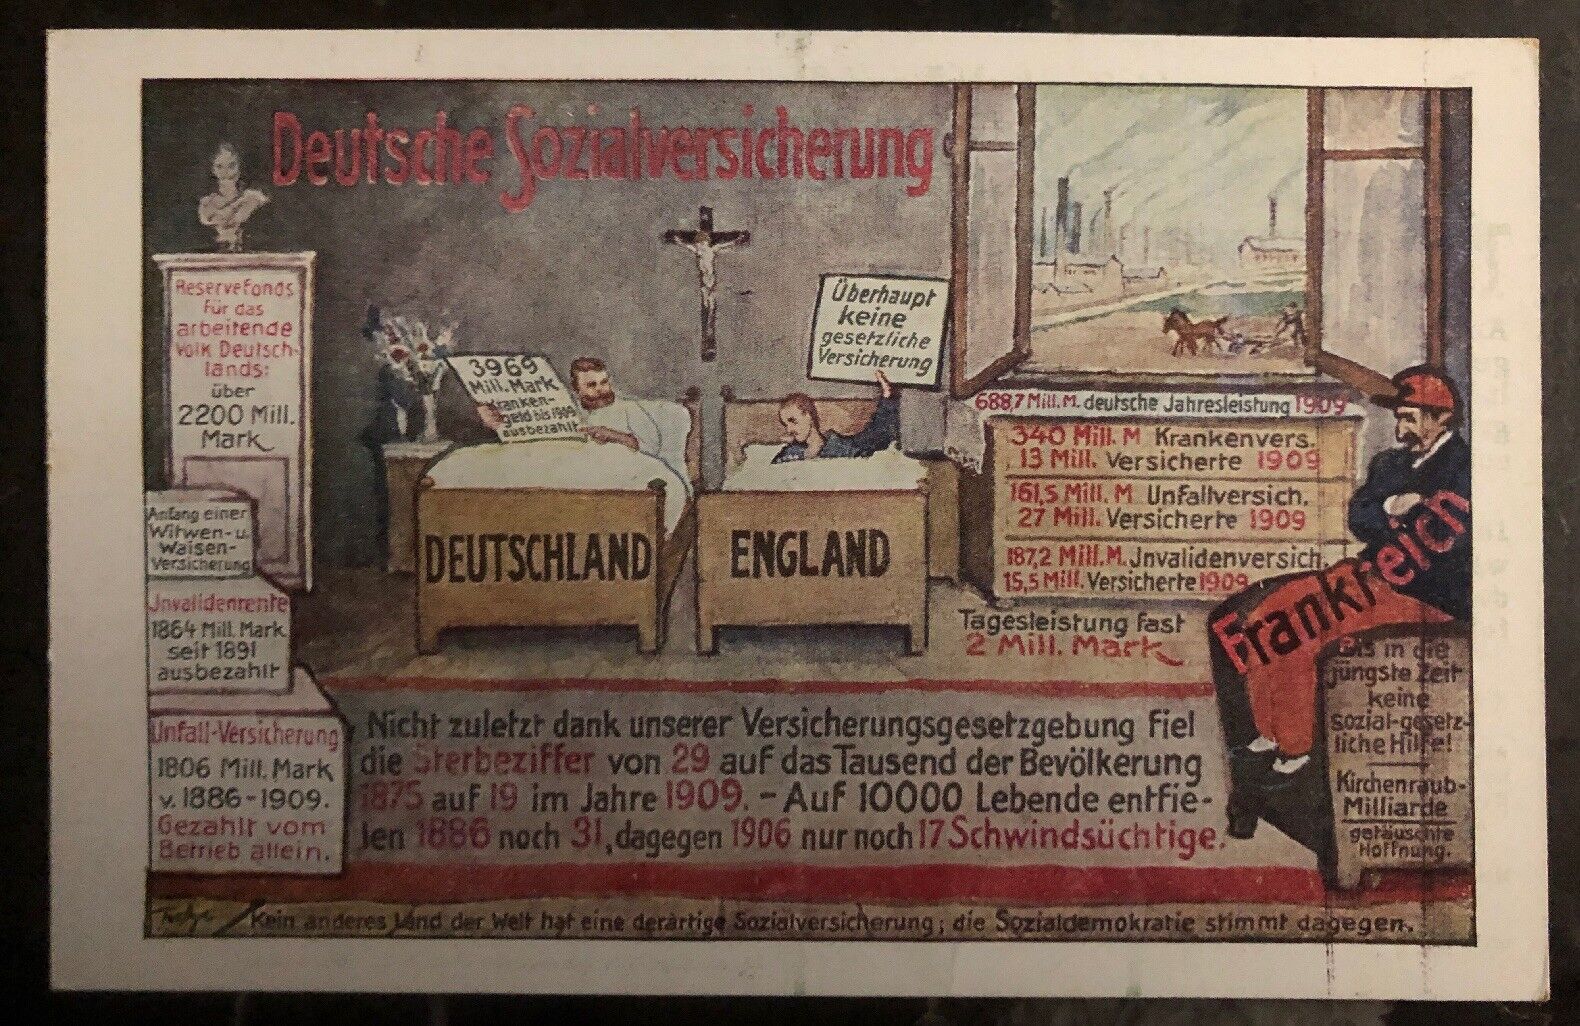 Mint Germany Picture Postcard German Social Security For True And Freedom